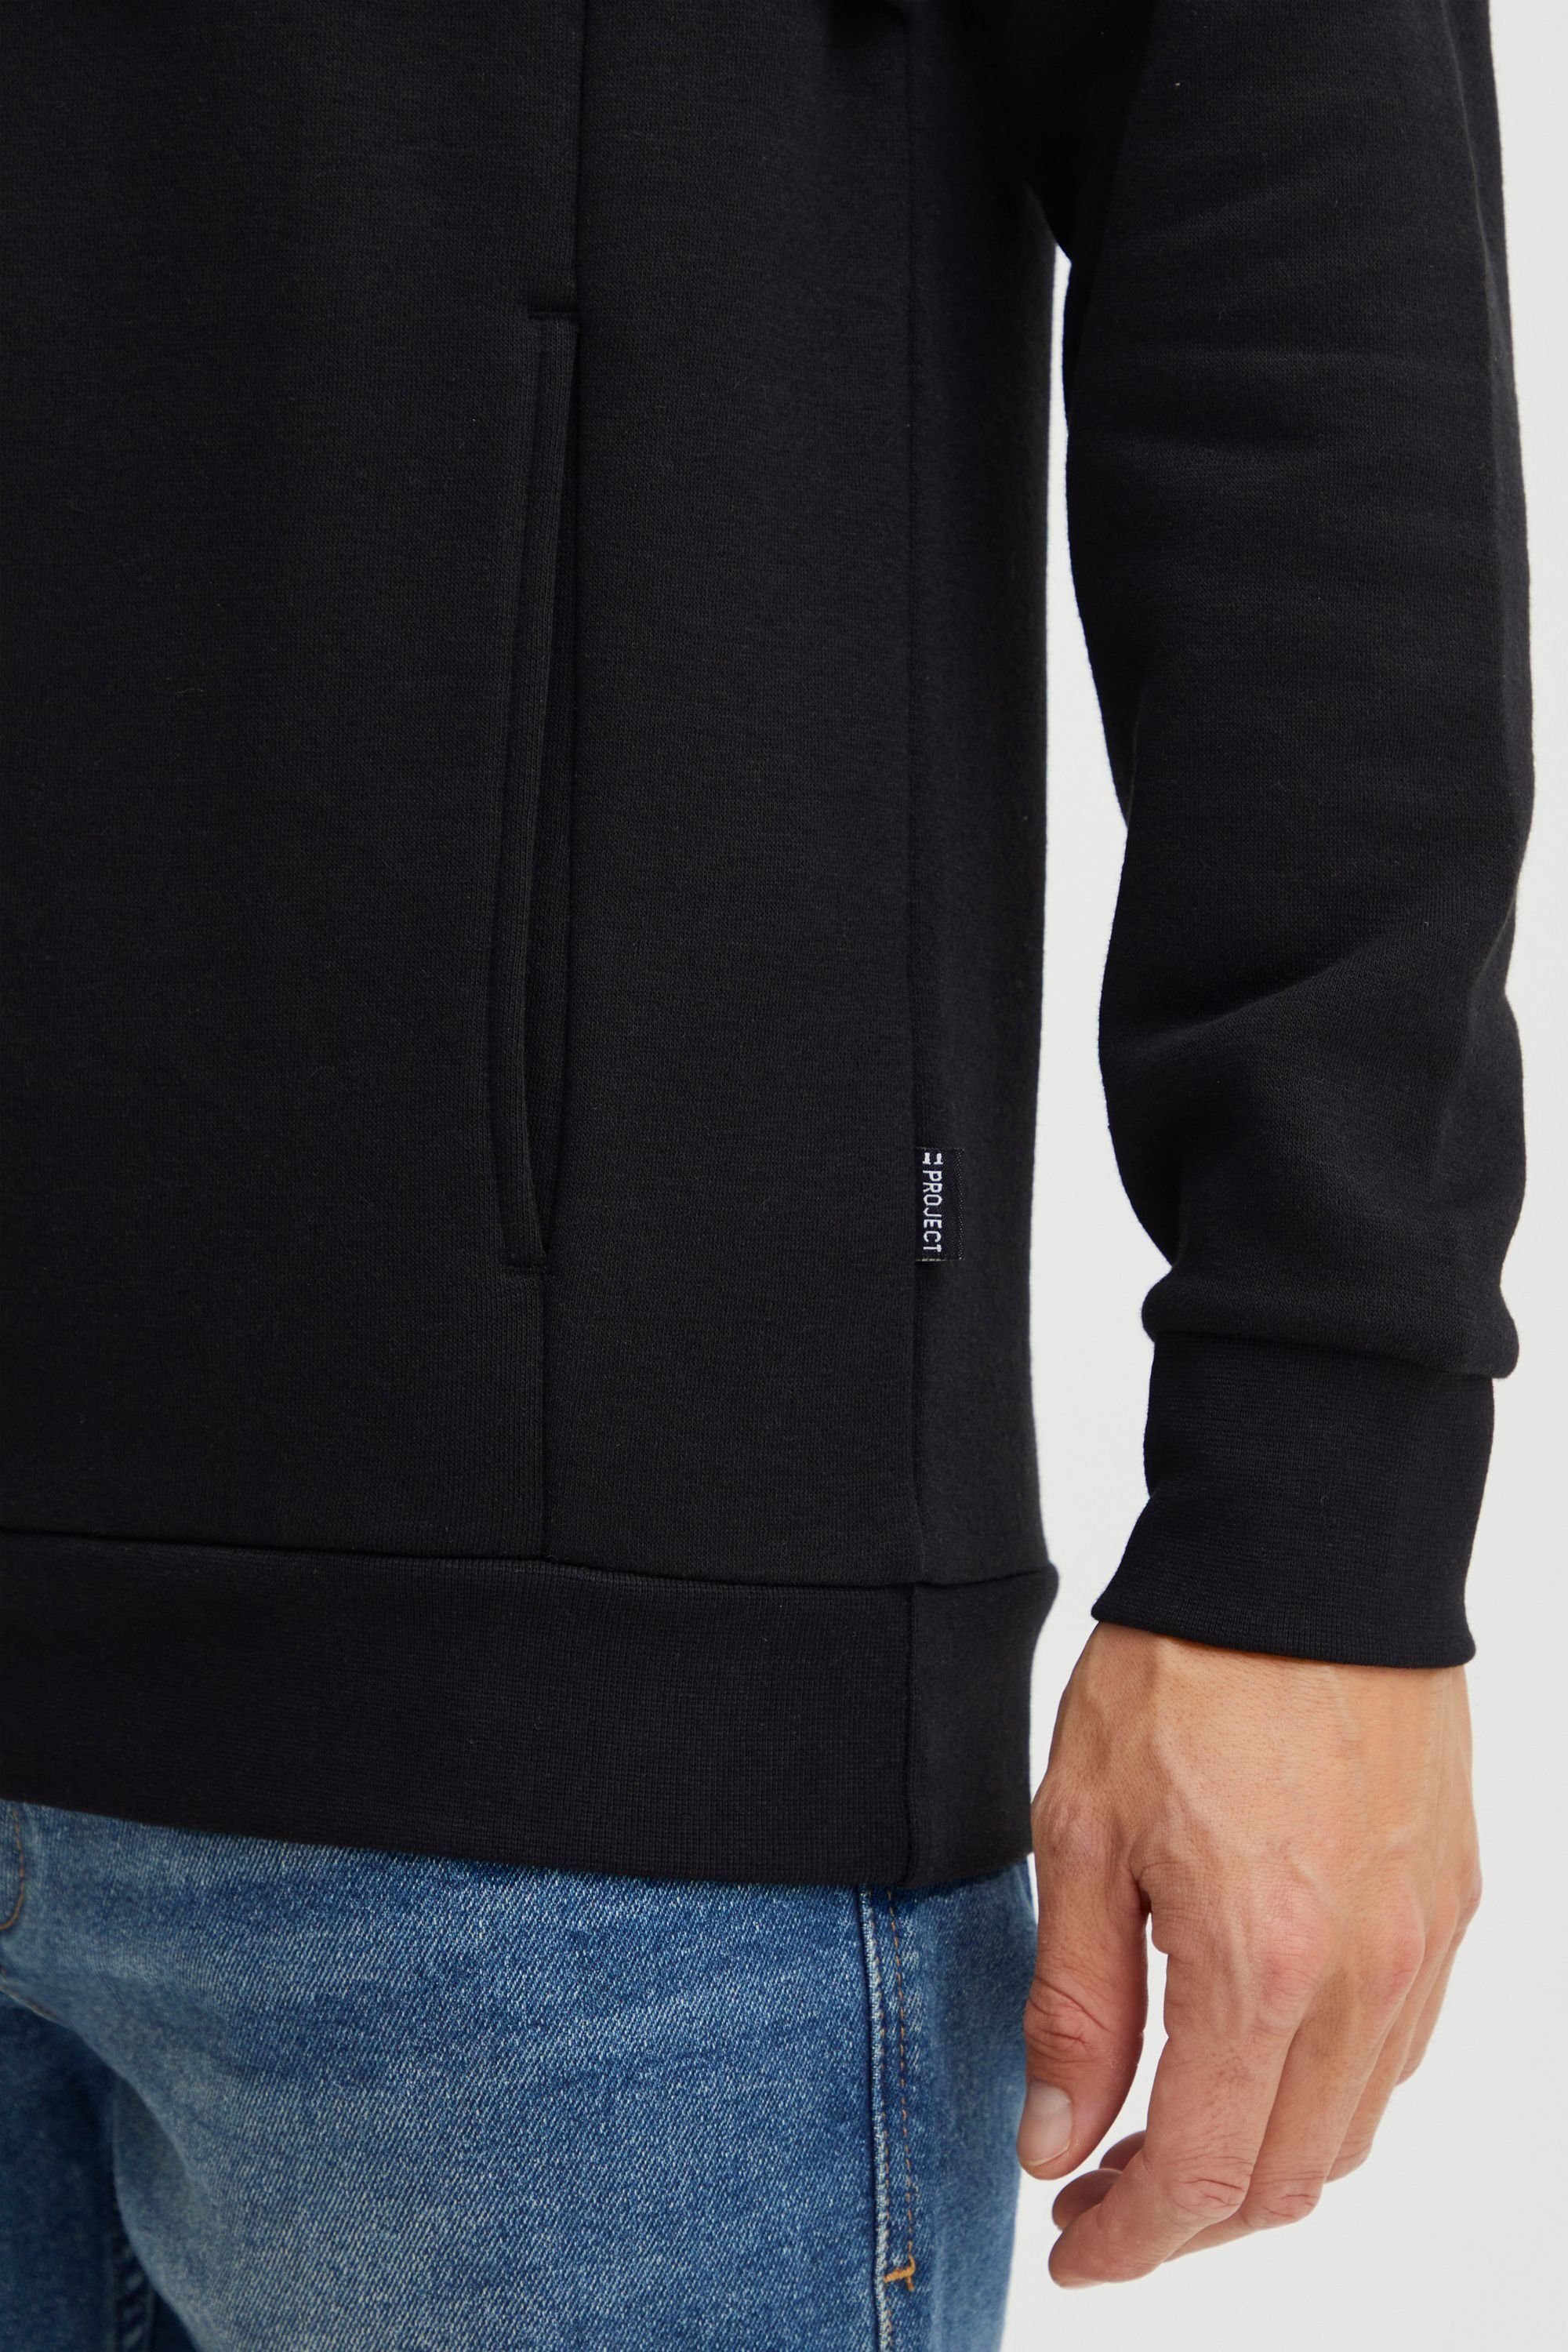 Project 11 Black PRAnno Project Hoodie 11